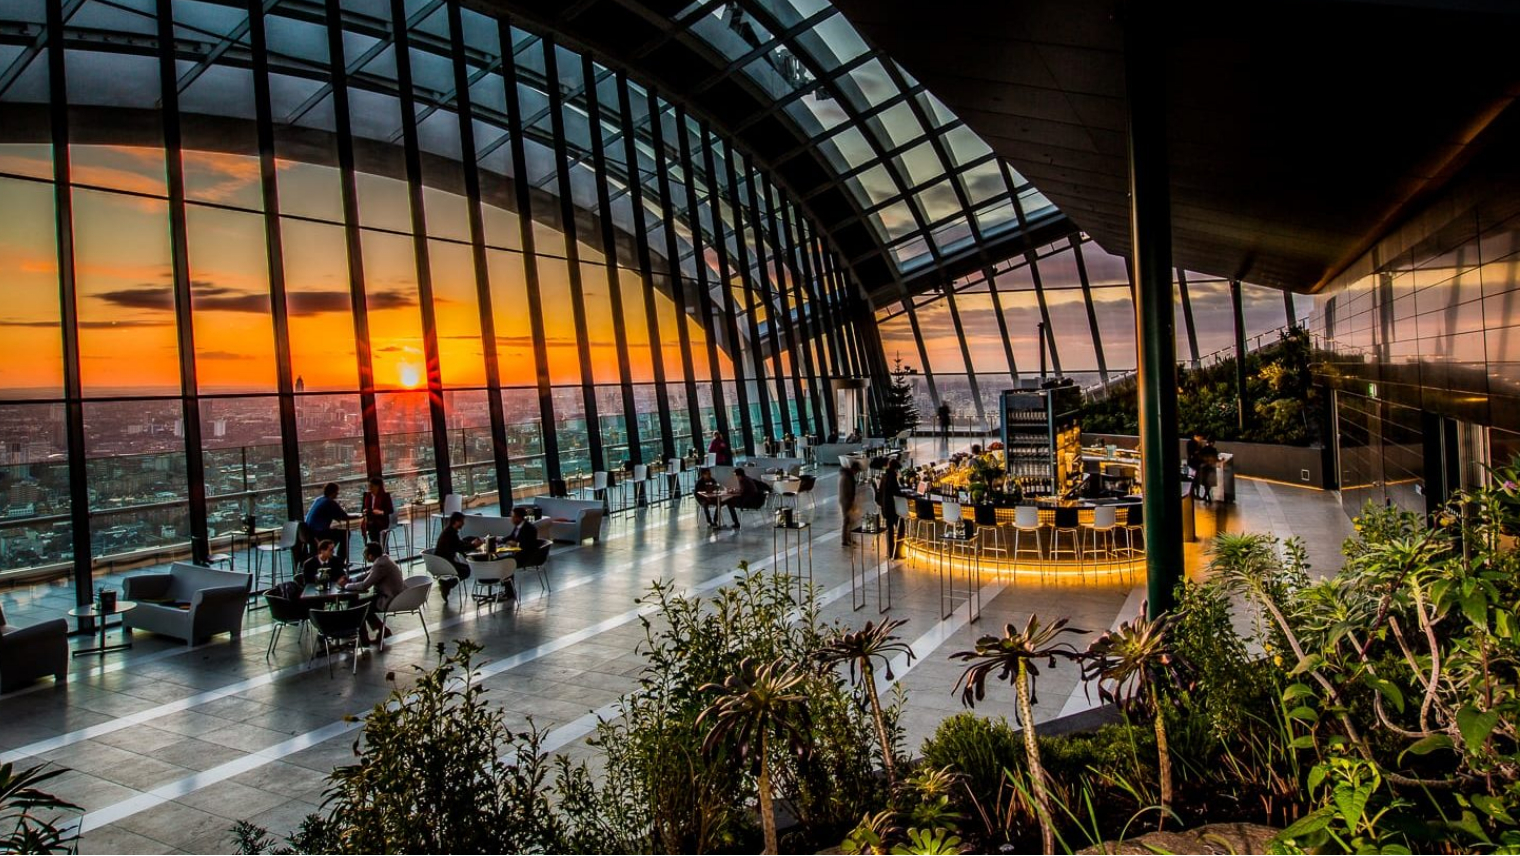 A view inside the Sky Garden at sunset